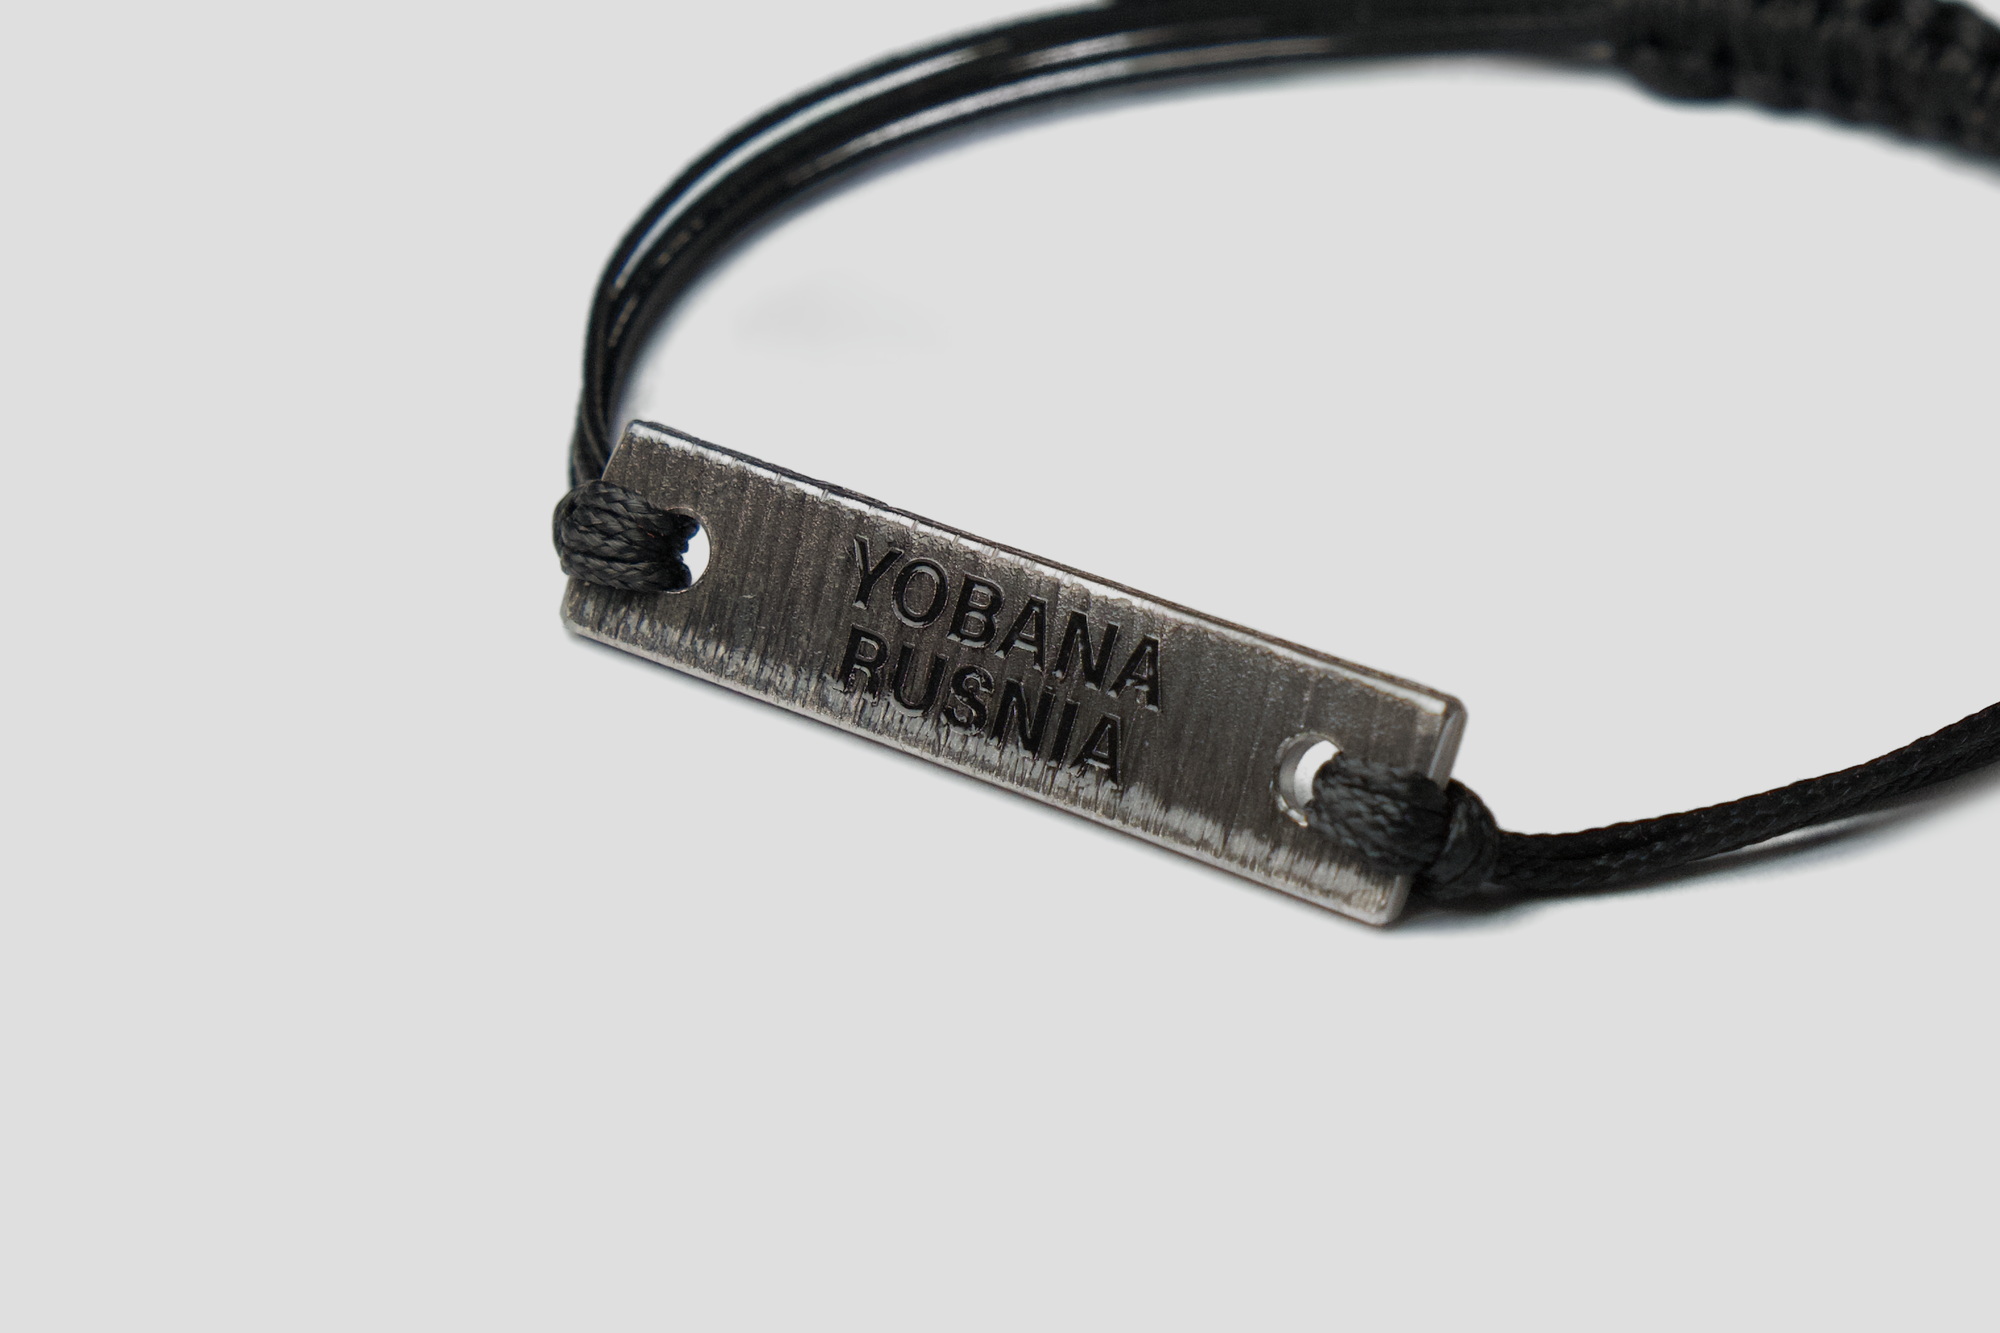 Bracelet that expresses the common opinion of the nation. It means: "Fa**ing russians"